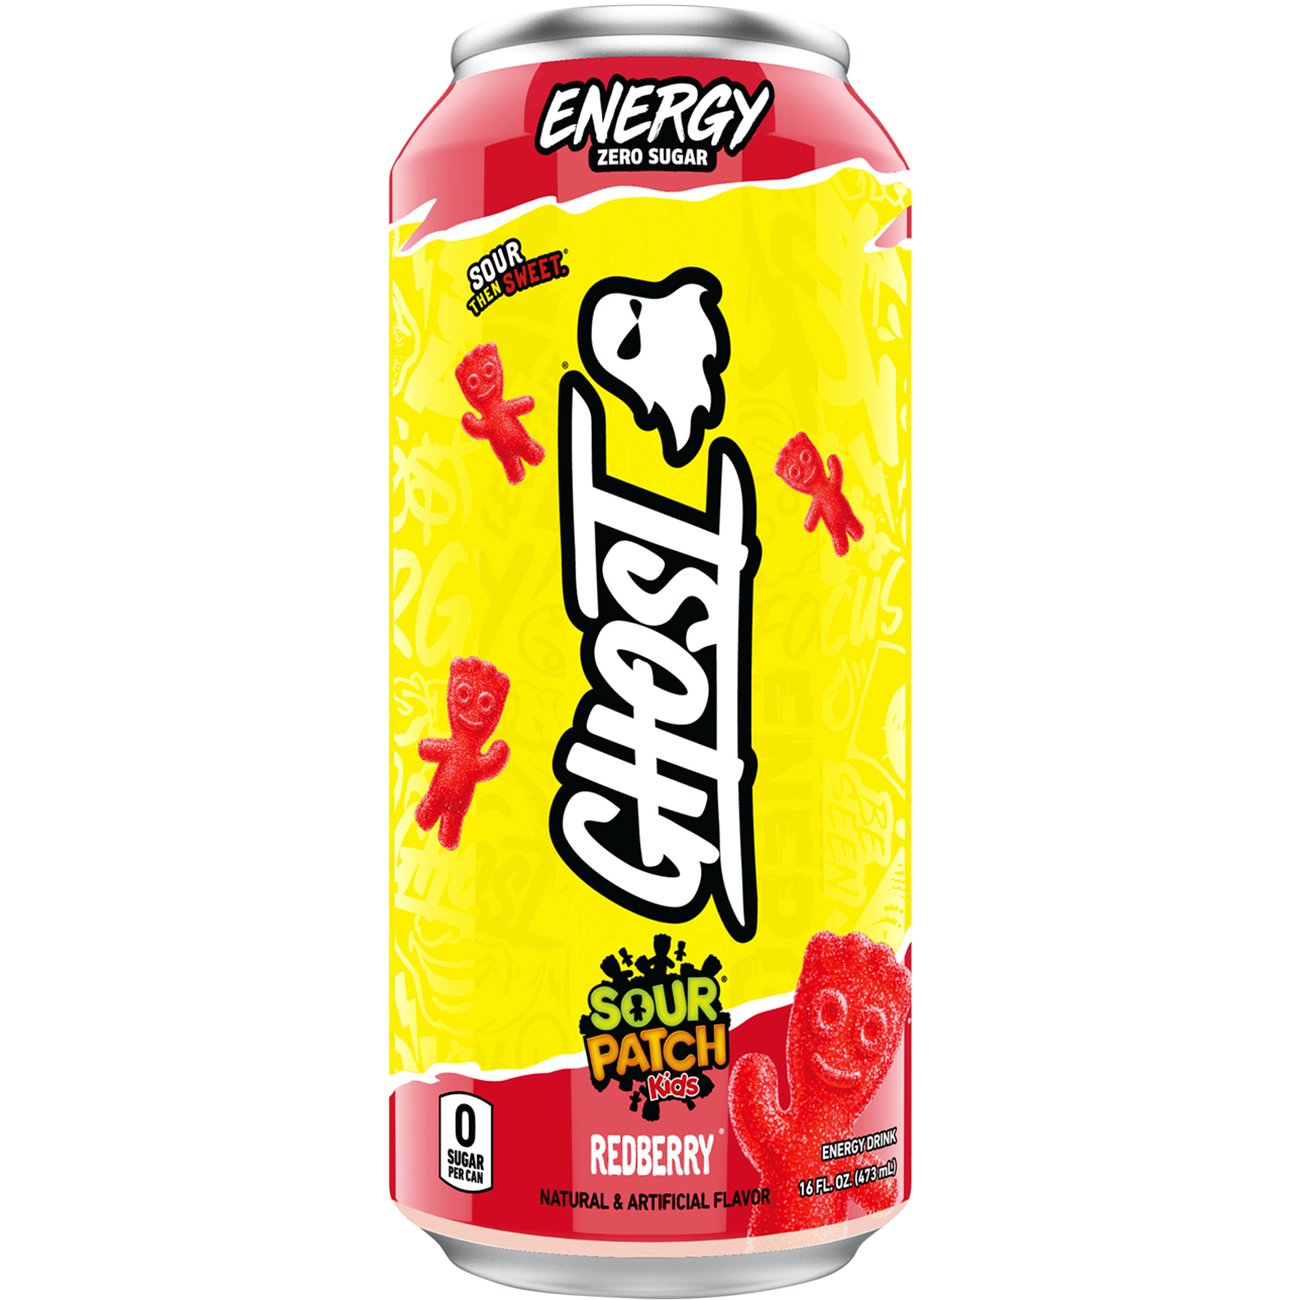 Ghost Energy Drink Sour Patch Kids Redberry Shop Sports & Energy